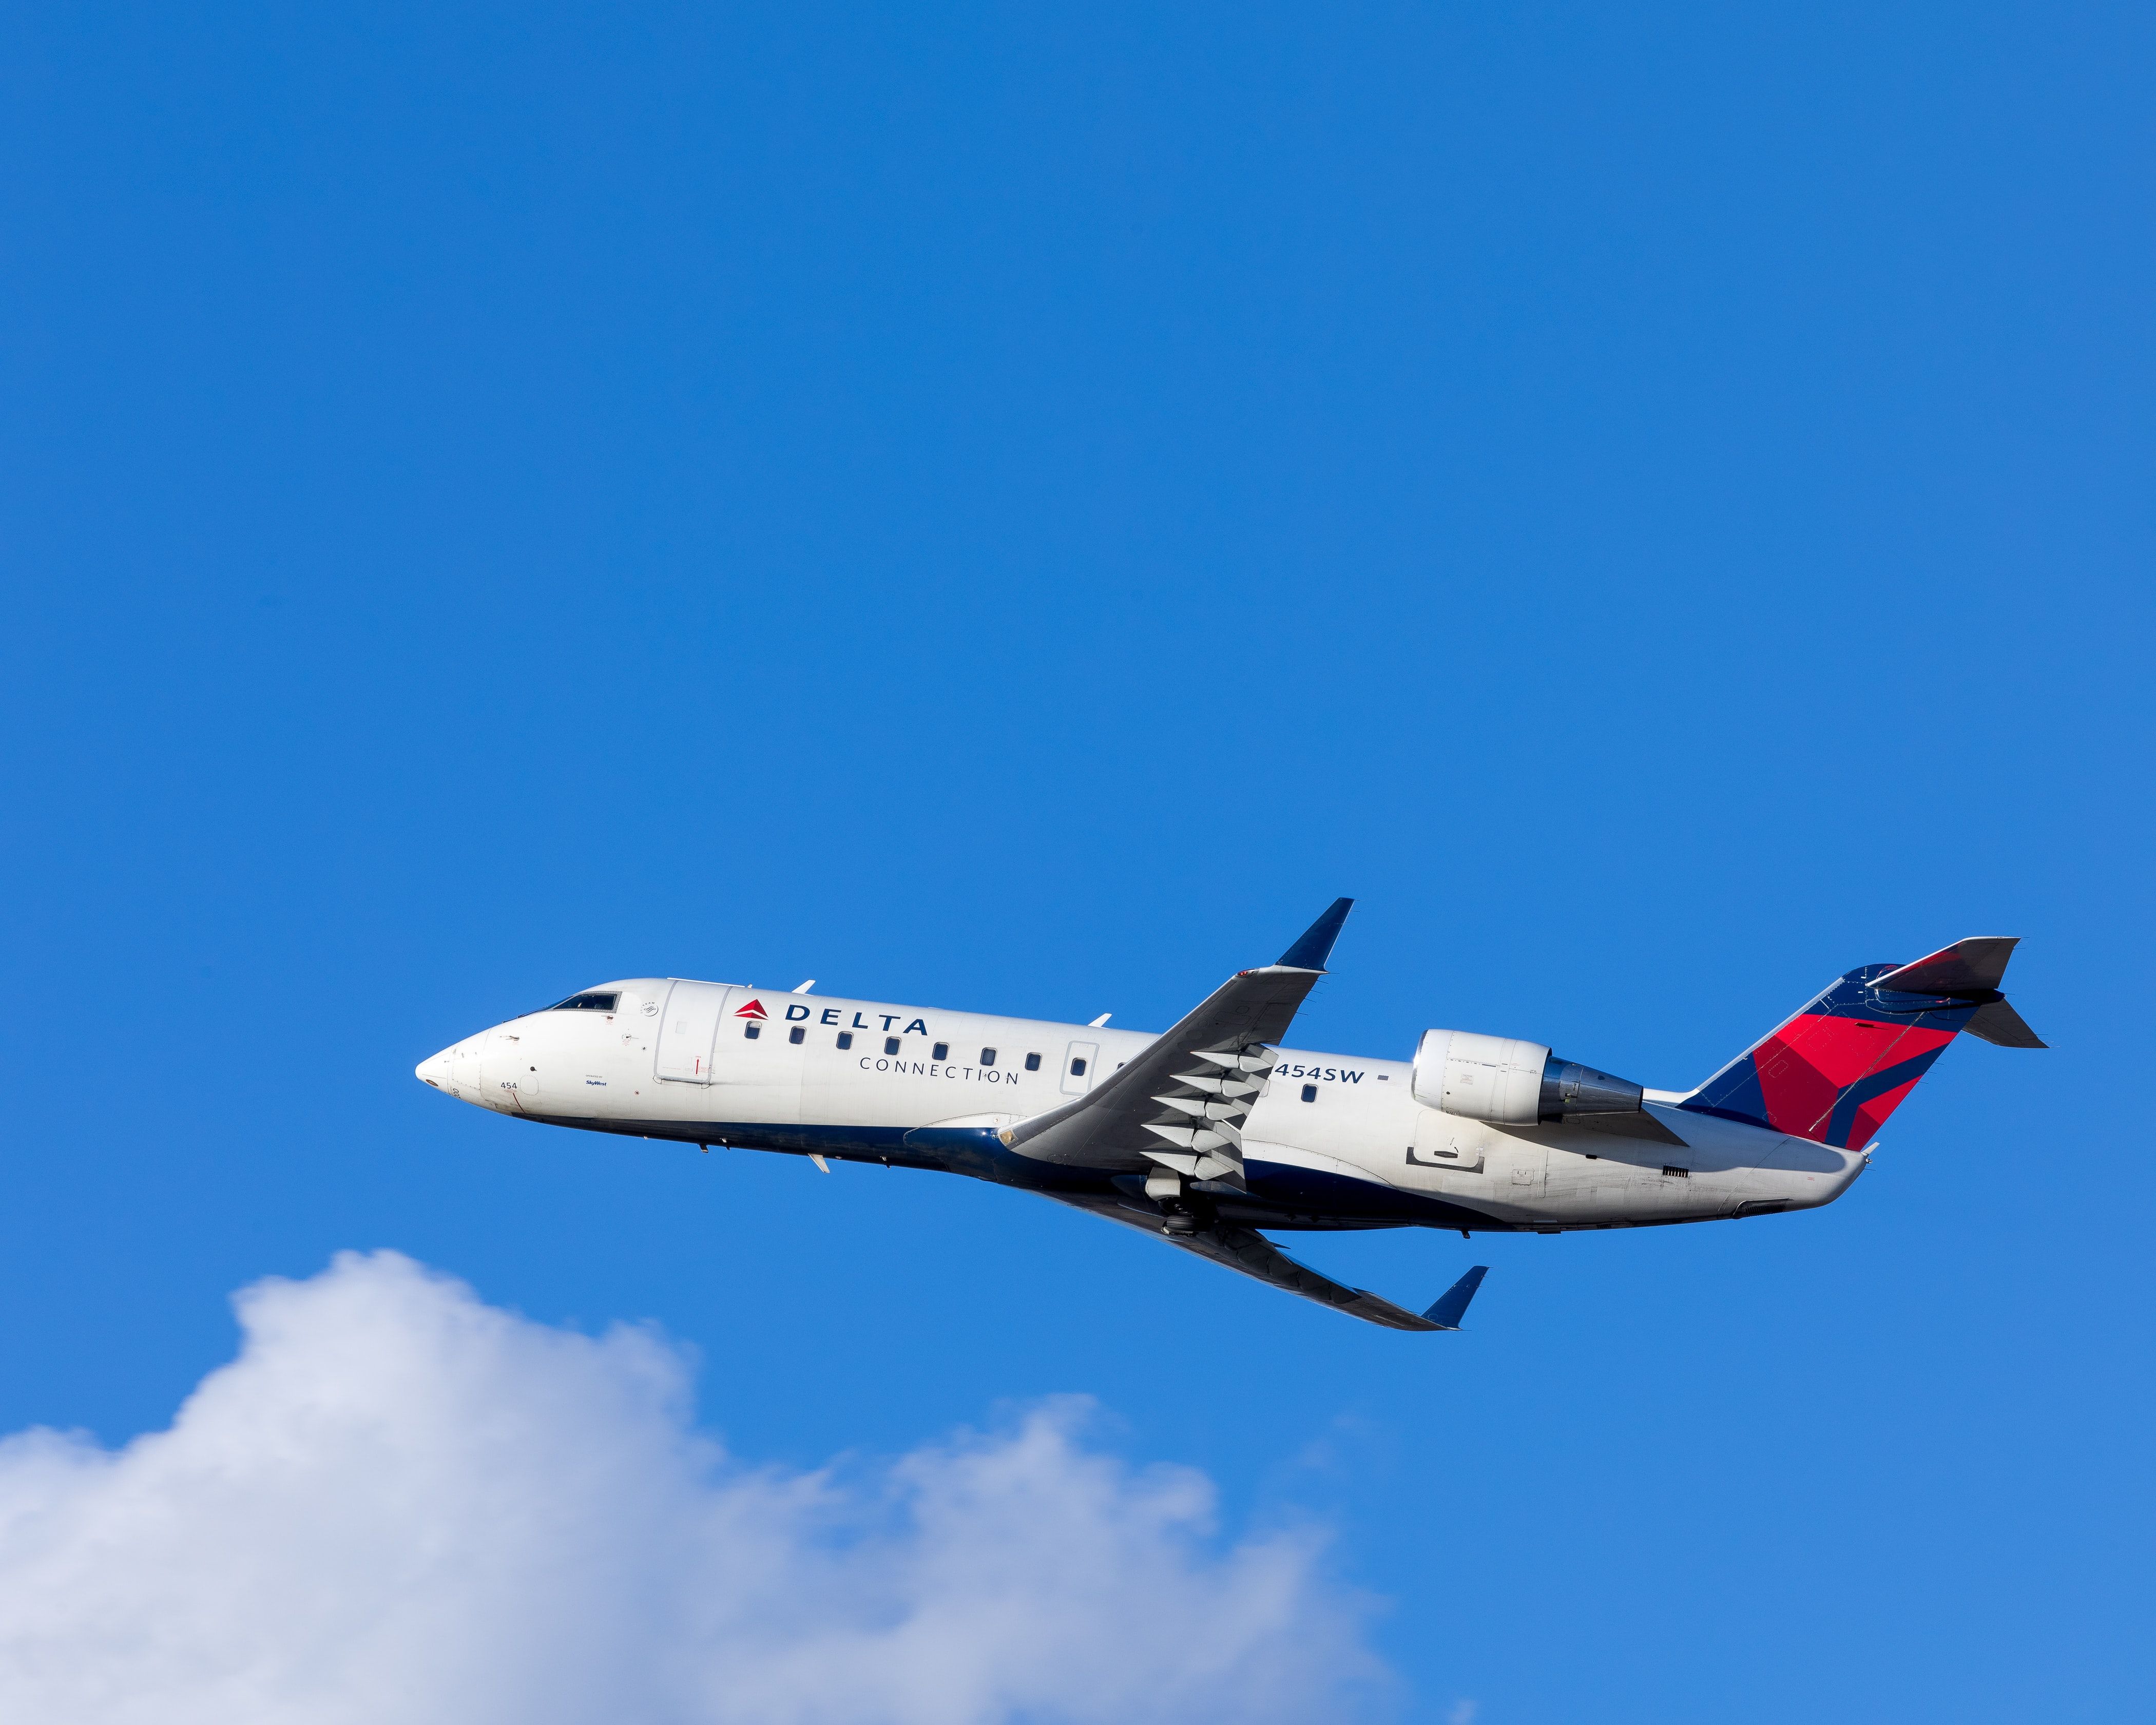 Delta Airlines delivers passengers safely to any destination.